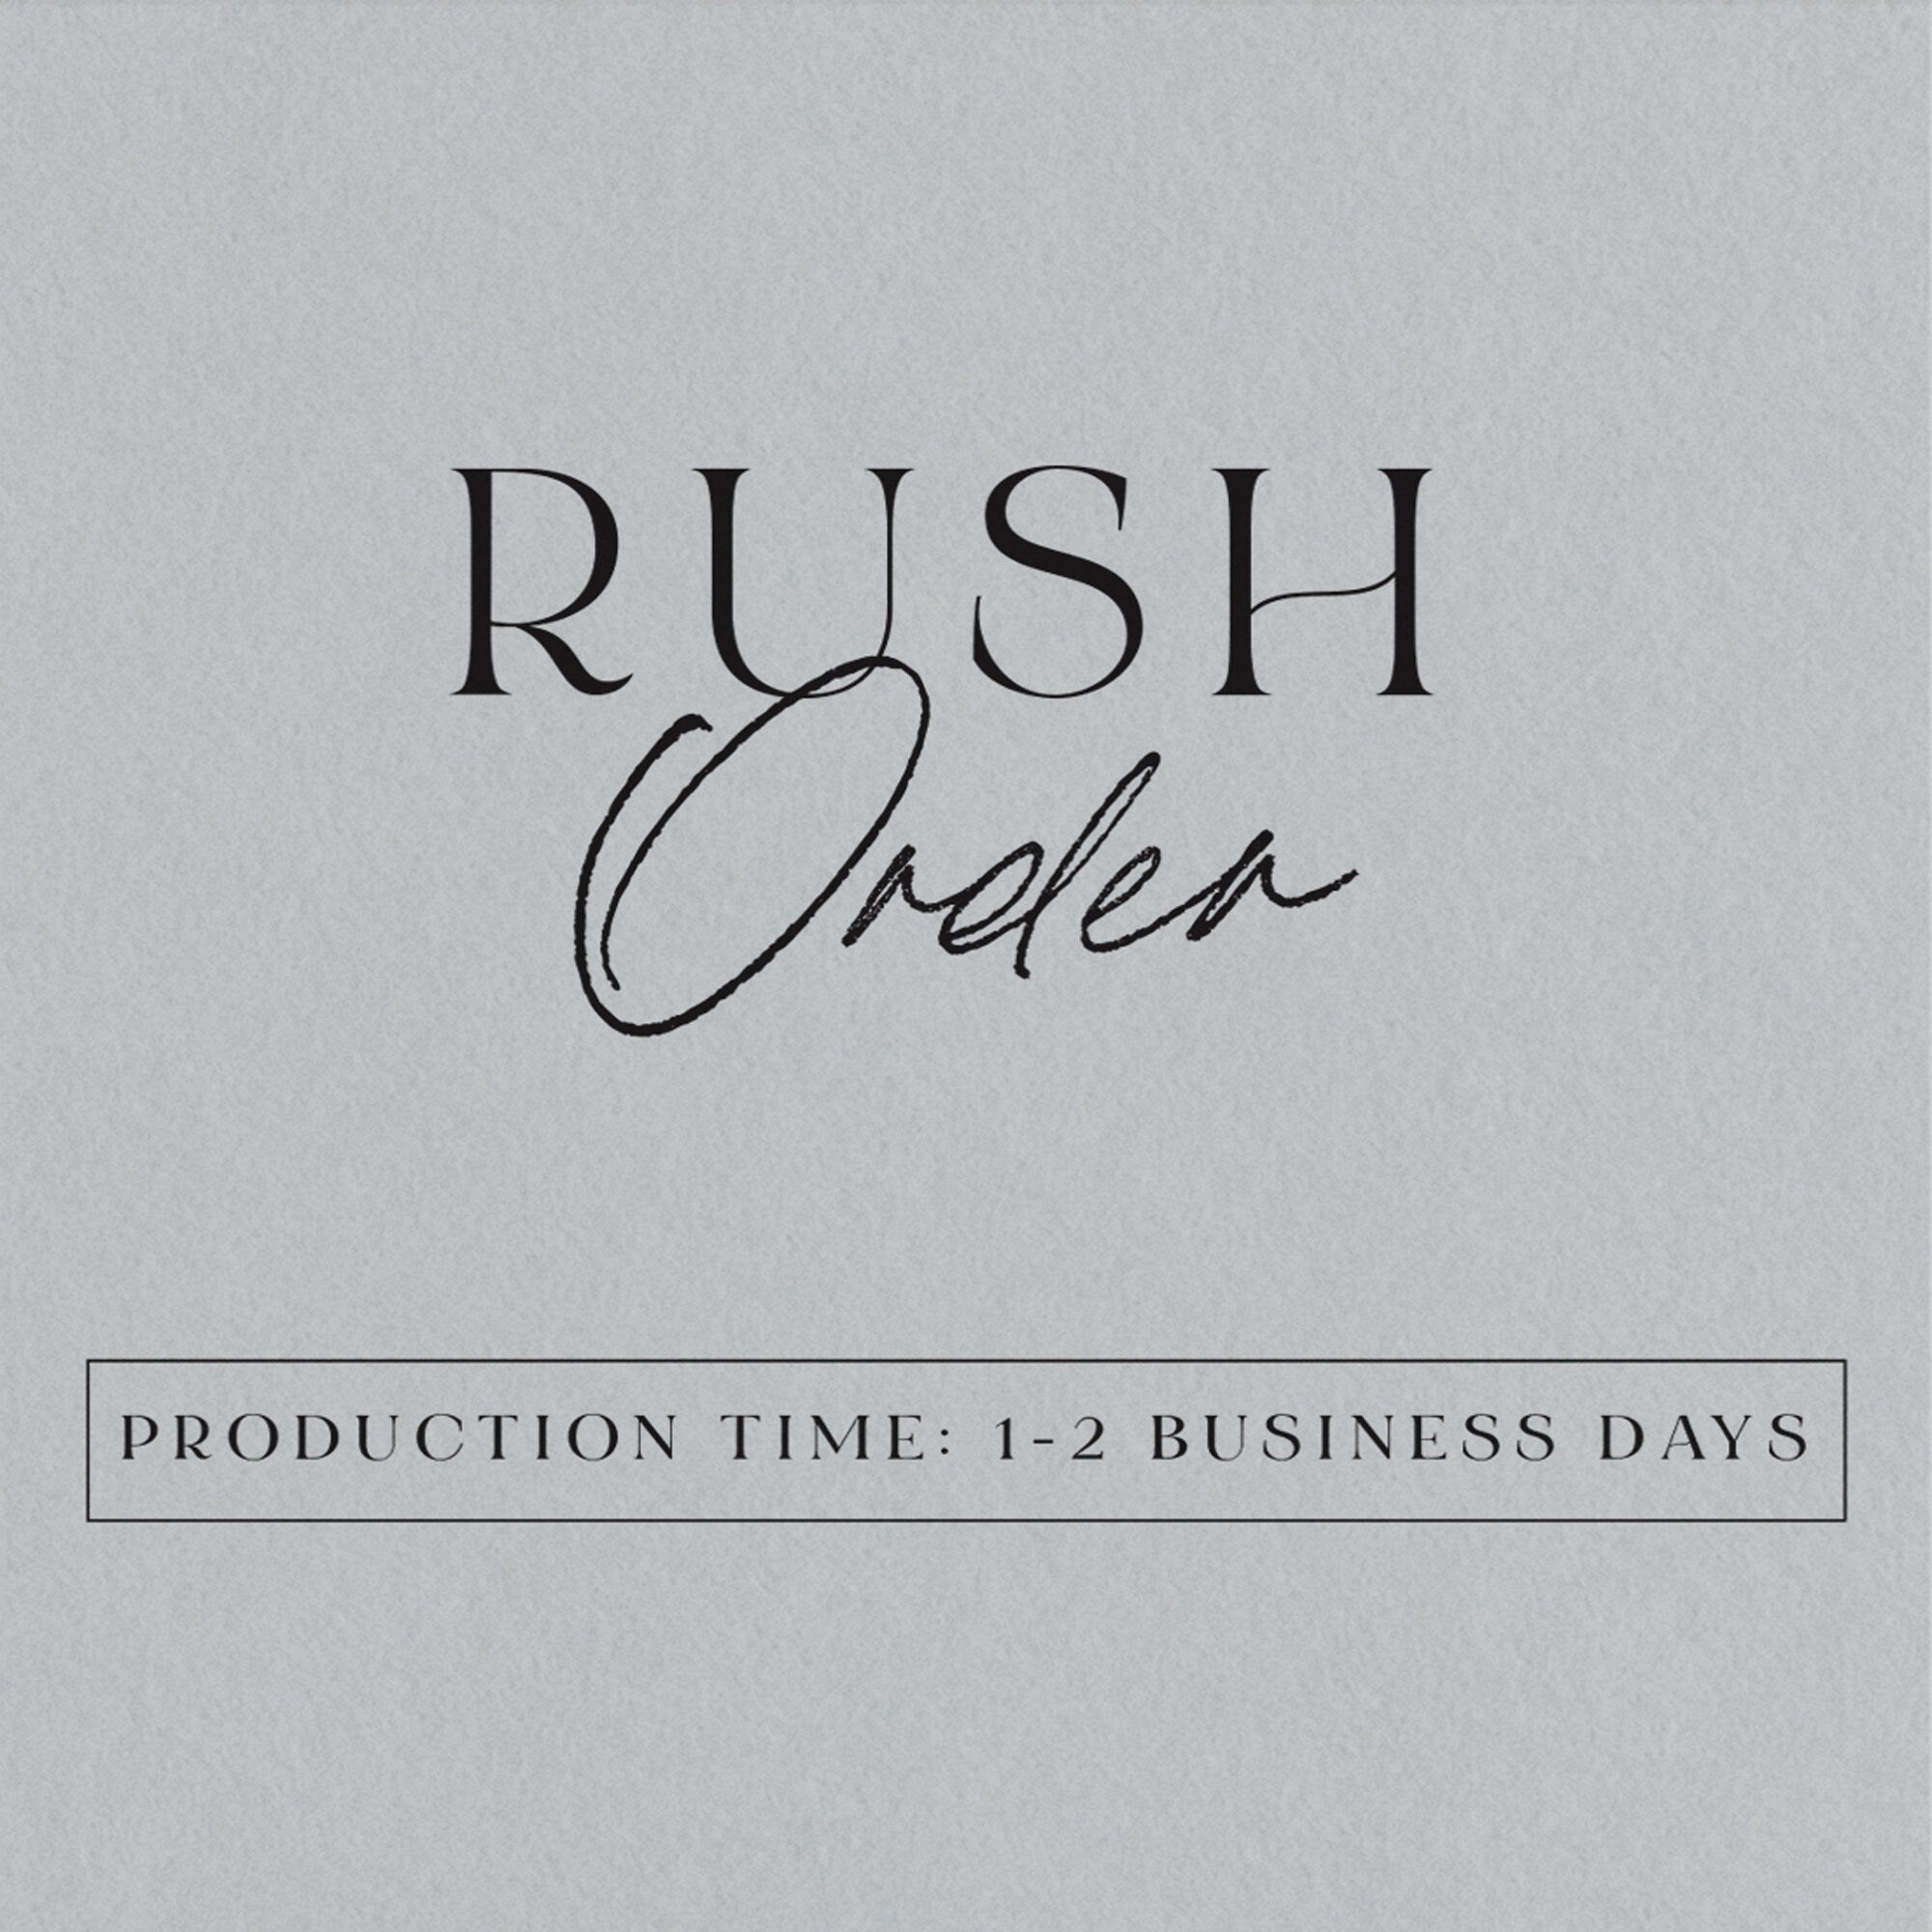 Rush Processing - Production time is 1 to 2 Business Days -  Weekends and Holidays Excluded